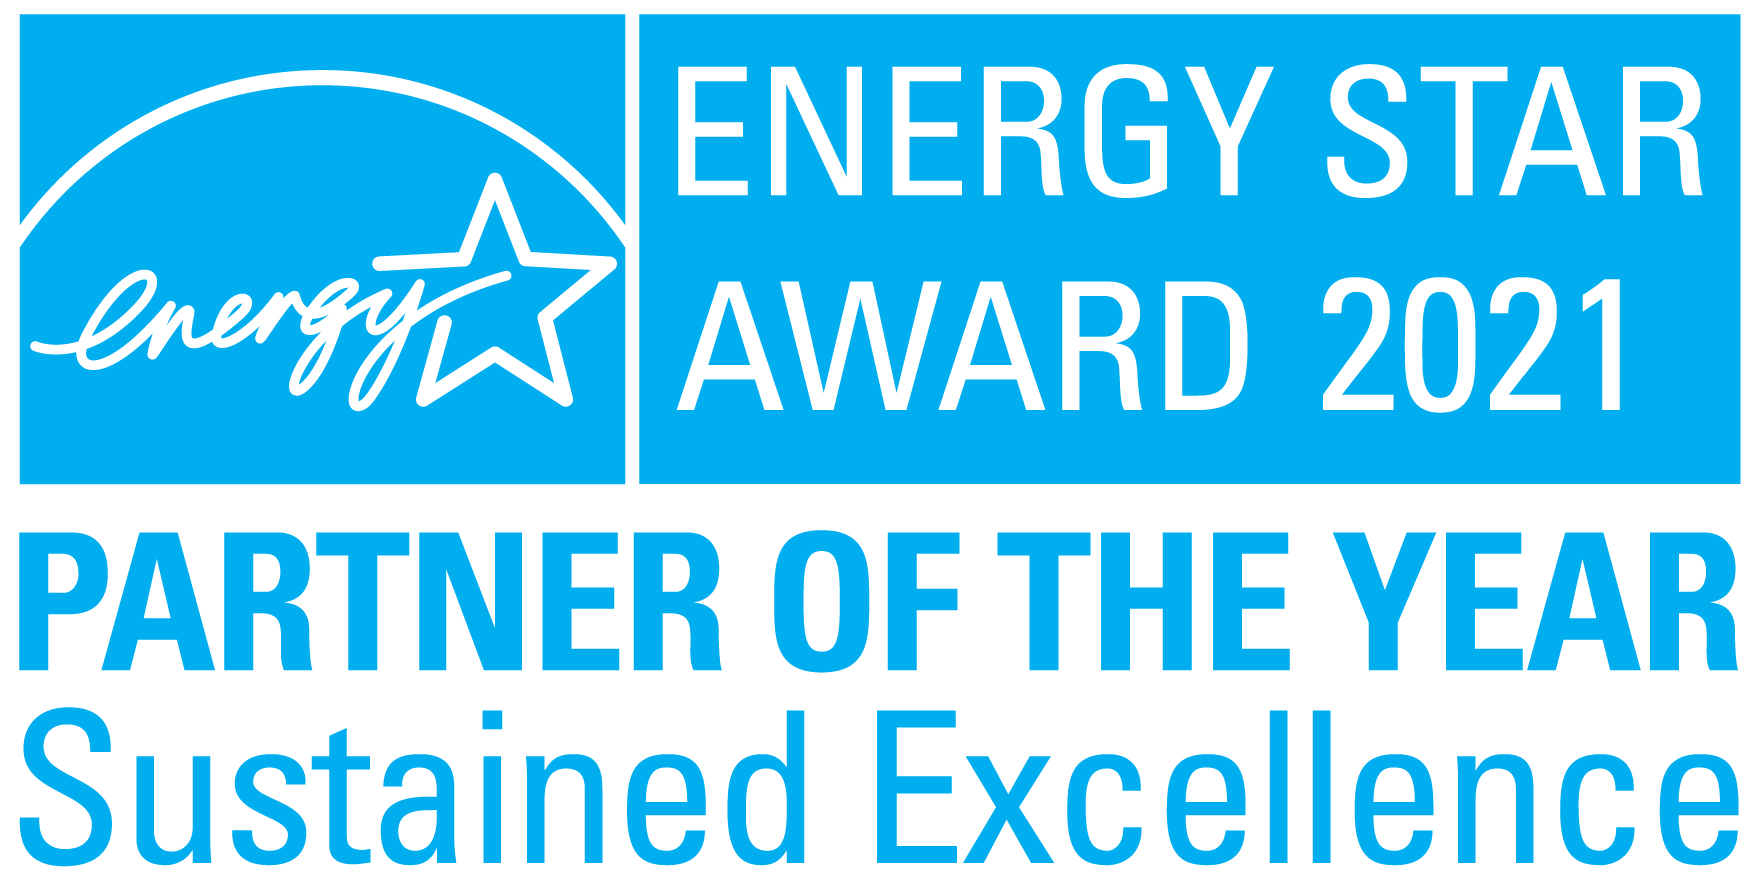 General Motors has received the 2021 ENERGY STAR Partner of the